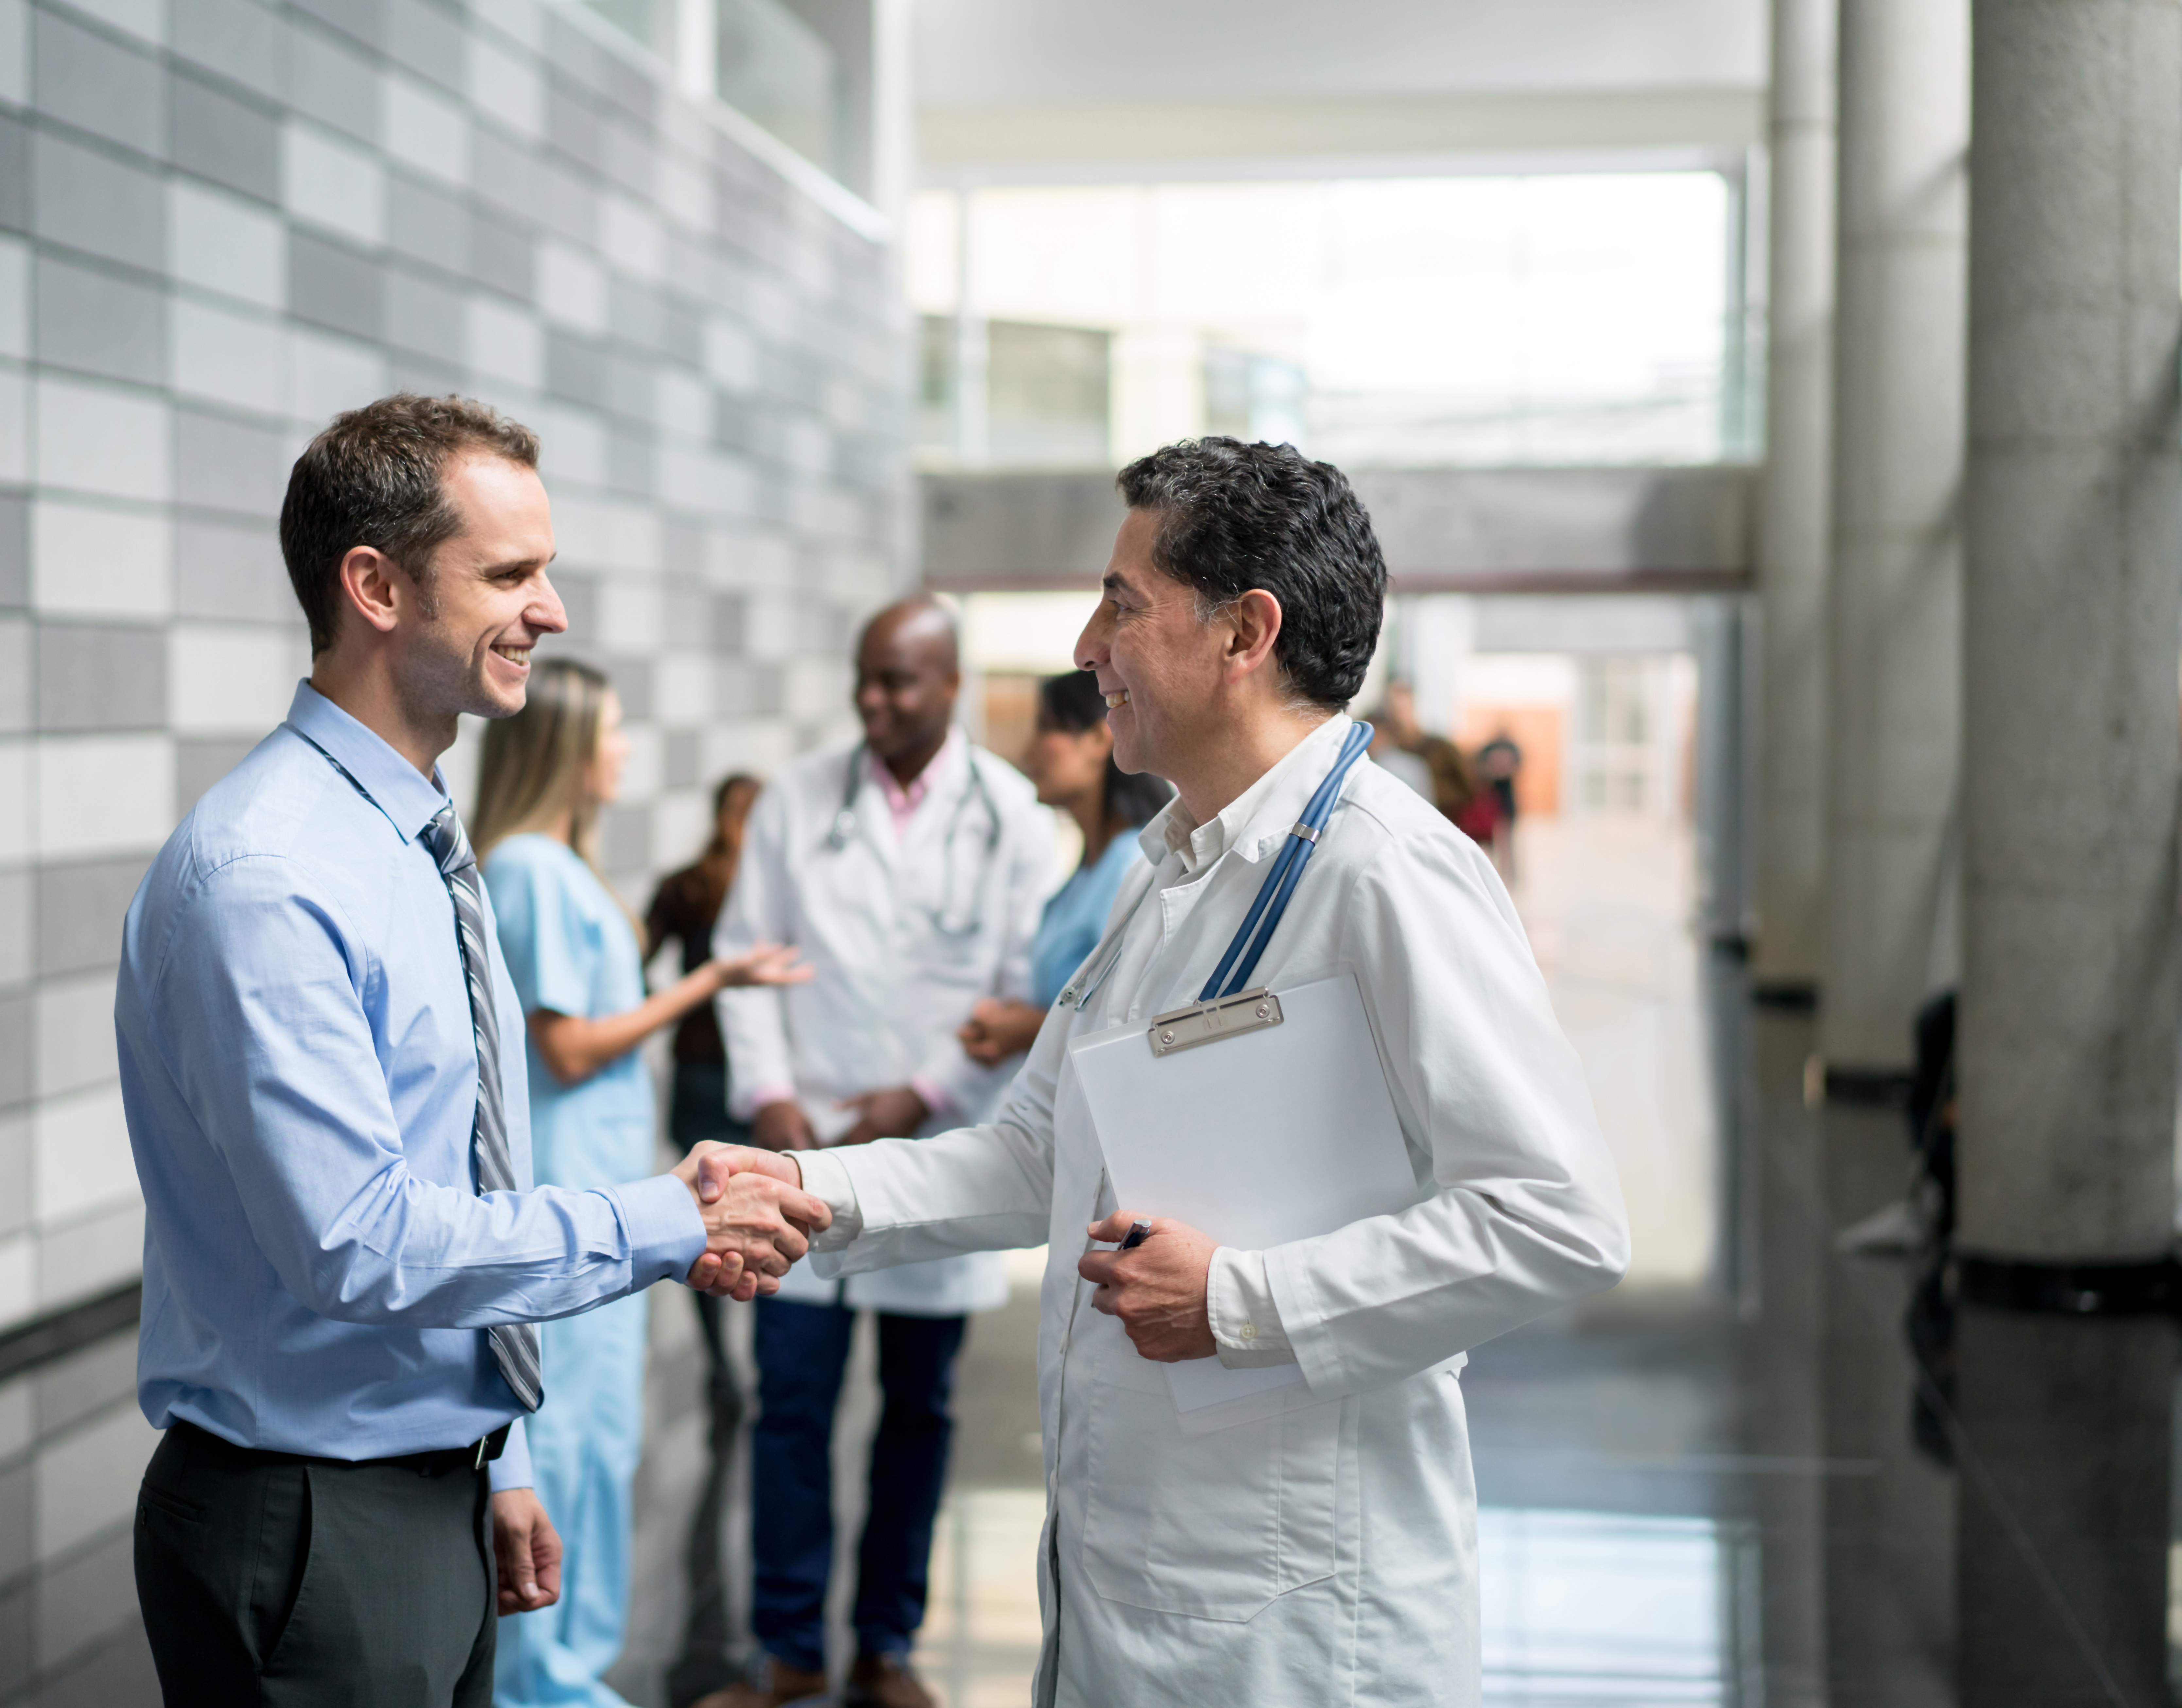 The Rise of Direct to Employer Healthcare Relationships